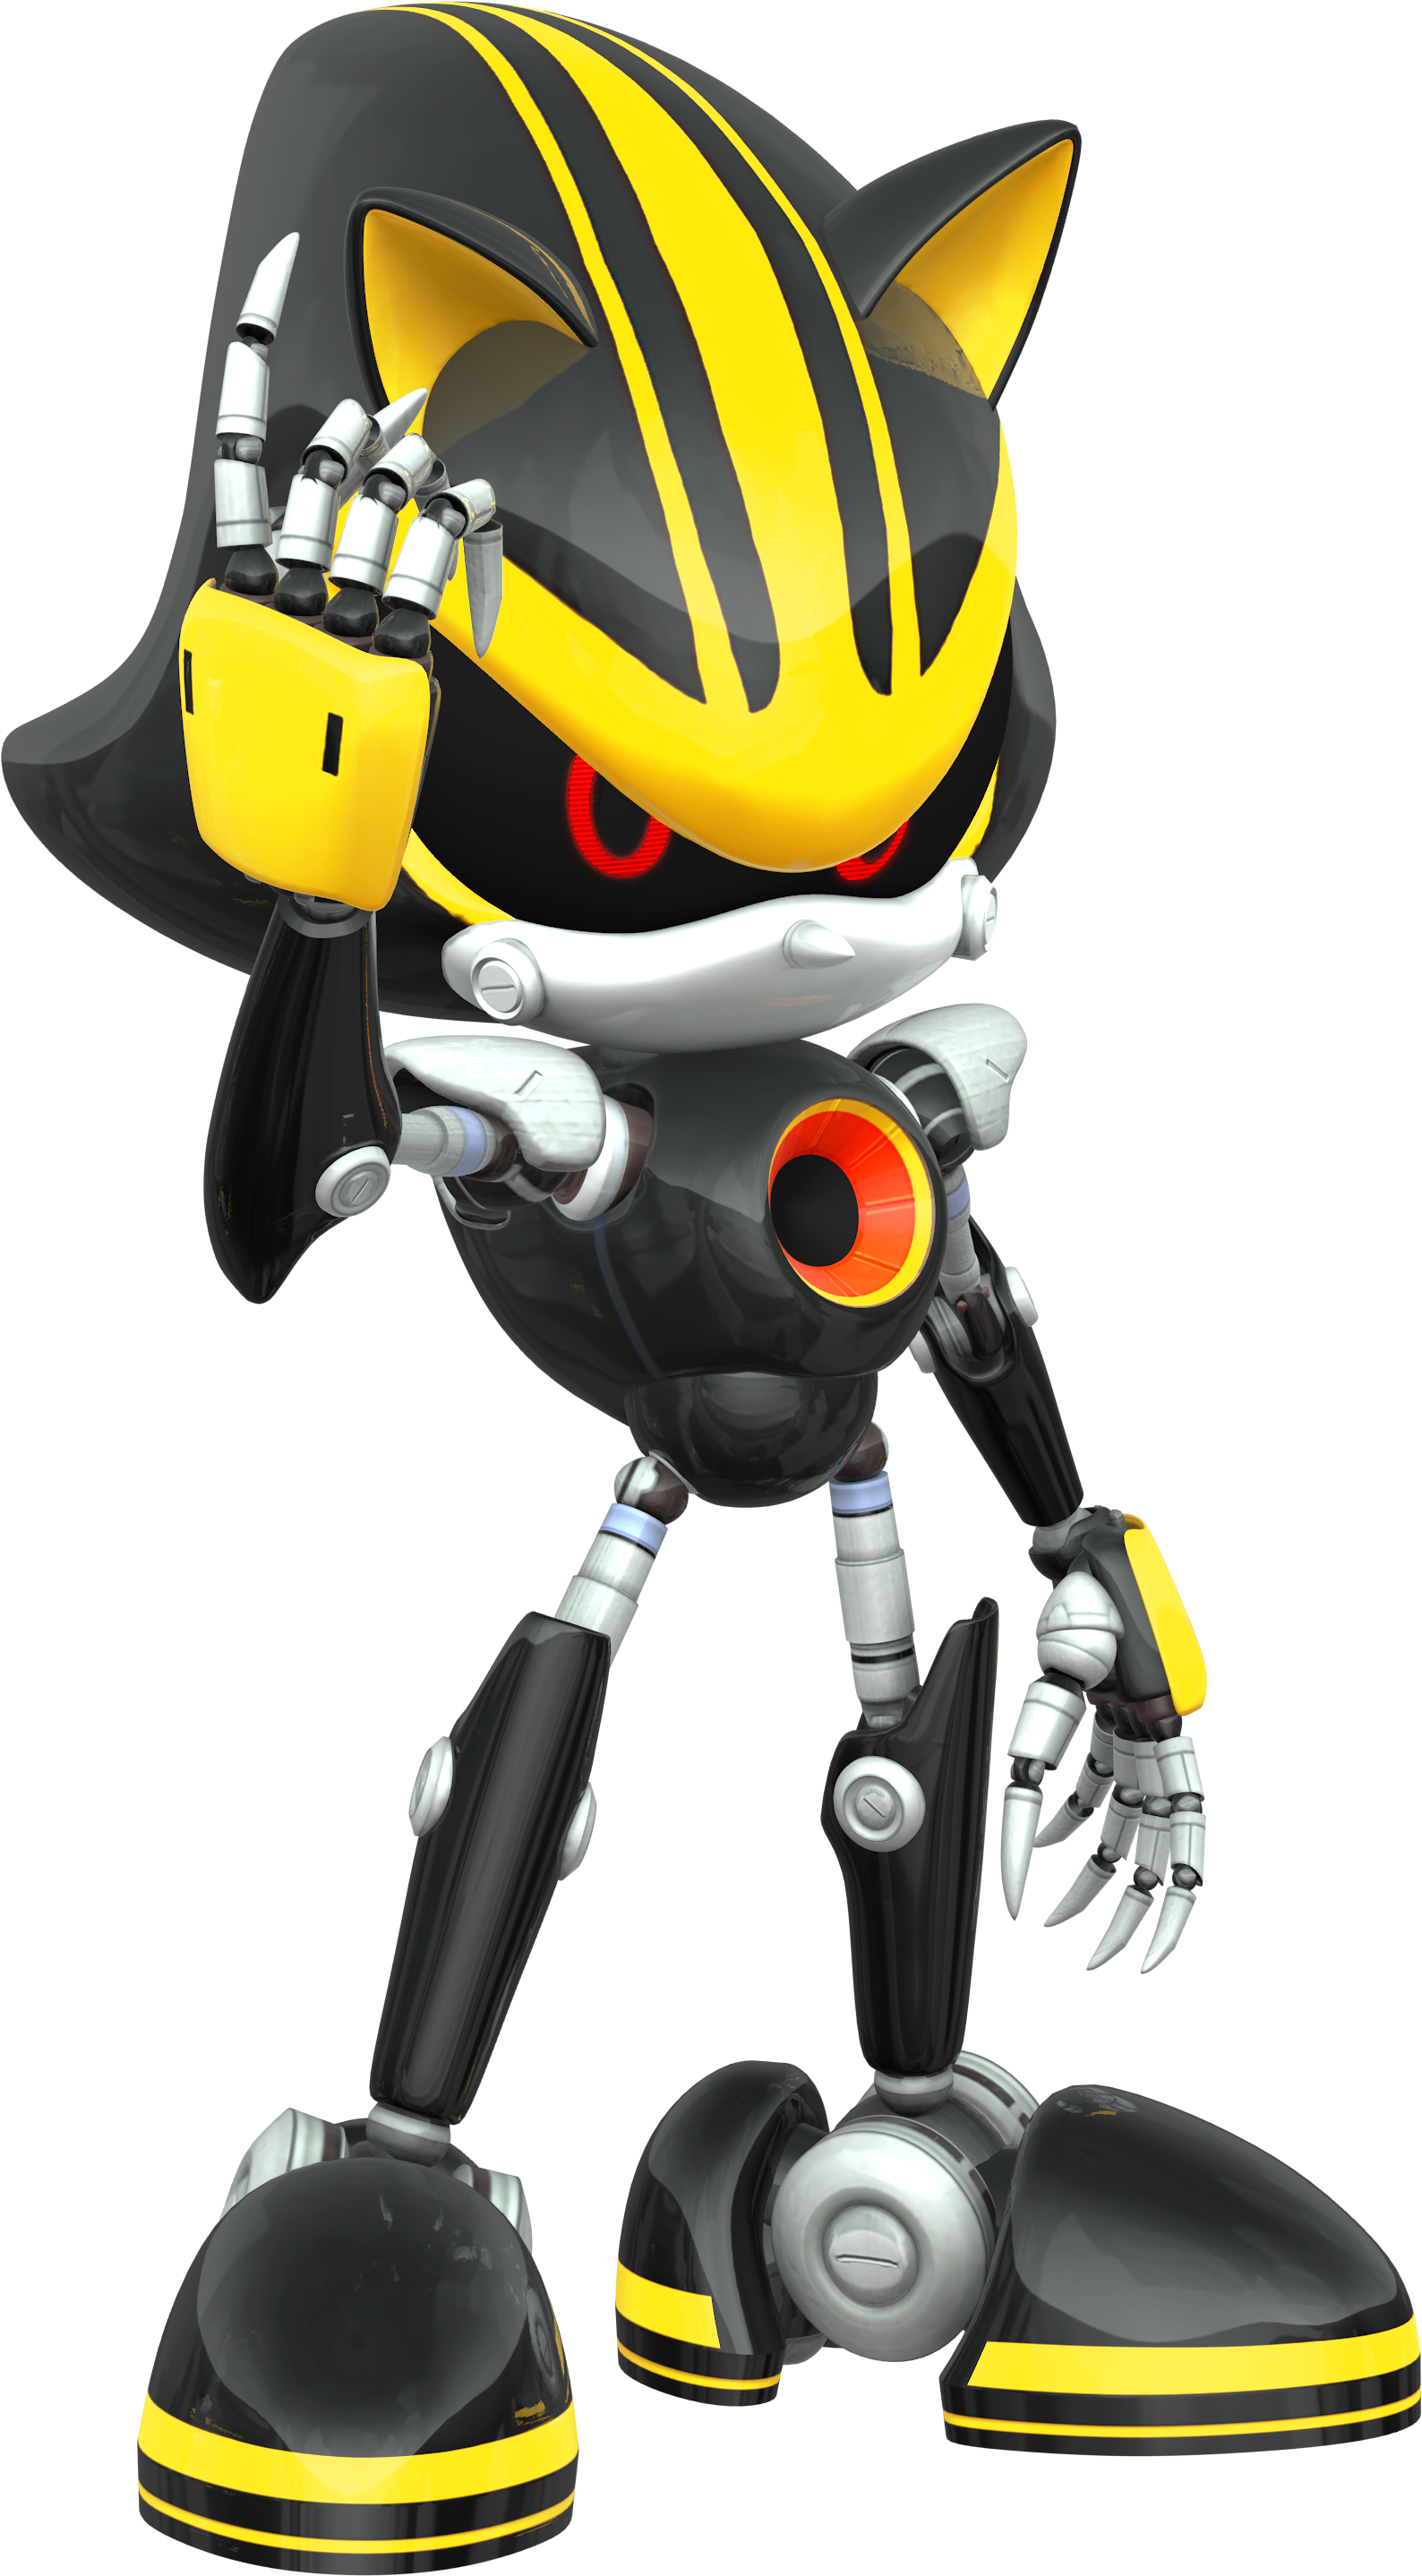 Sonic The Hedgehog 3 Sonic The Hedgehog - Sonic Metal Sonic 3.0 (3000x3000), Png Download